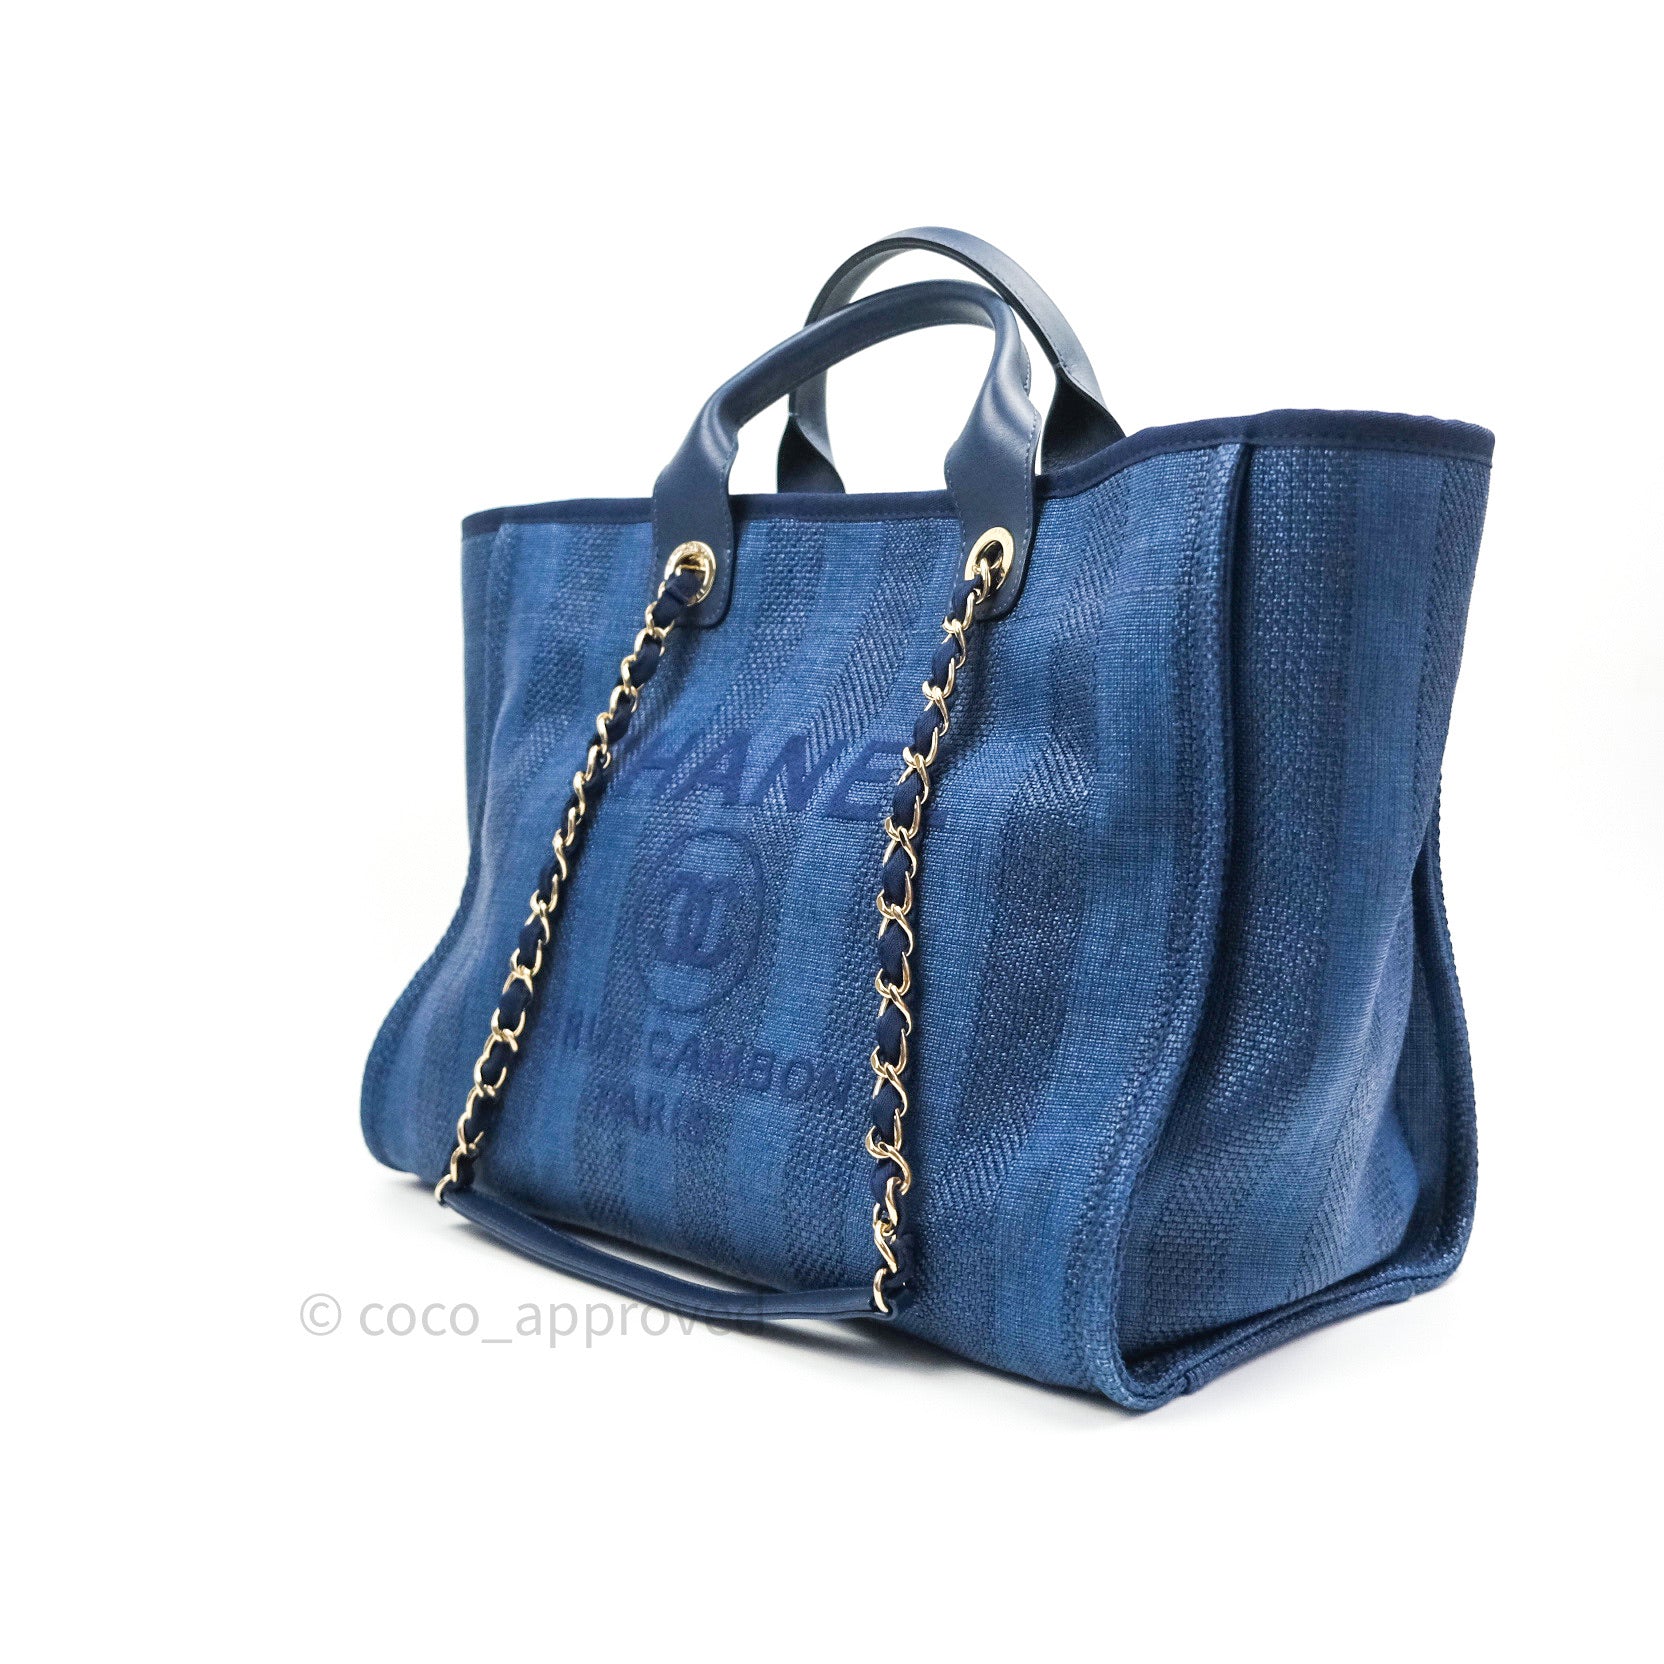 CHANEL Caviar Large Studded Deauville Tote Navy 500469